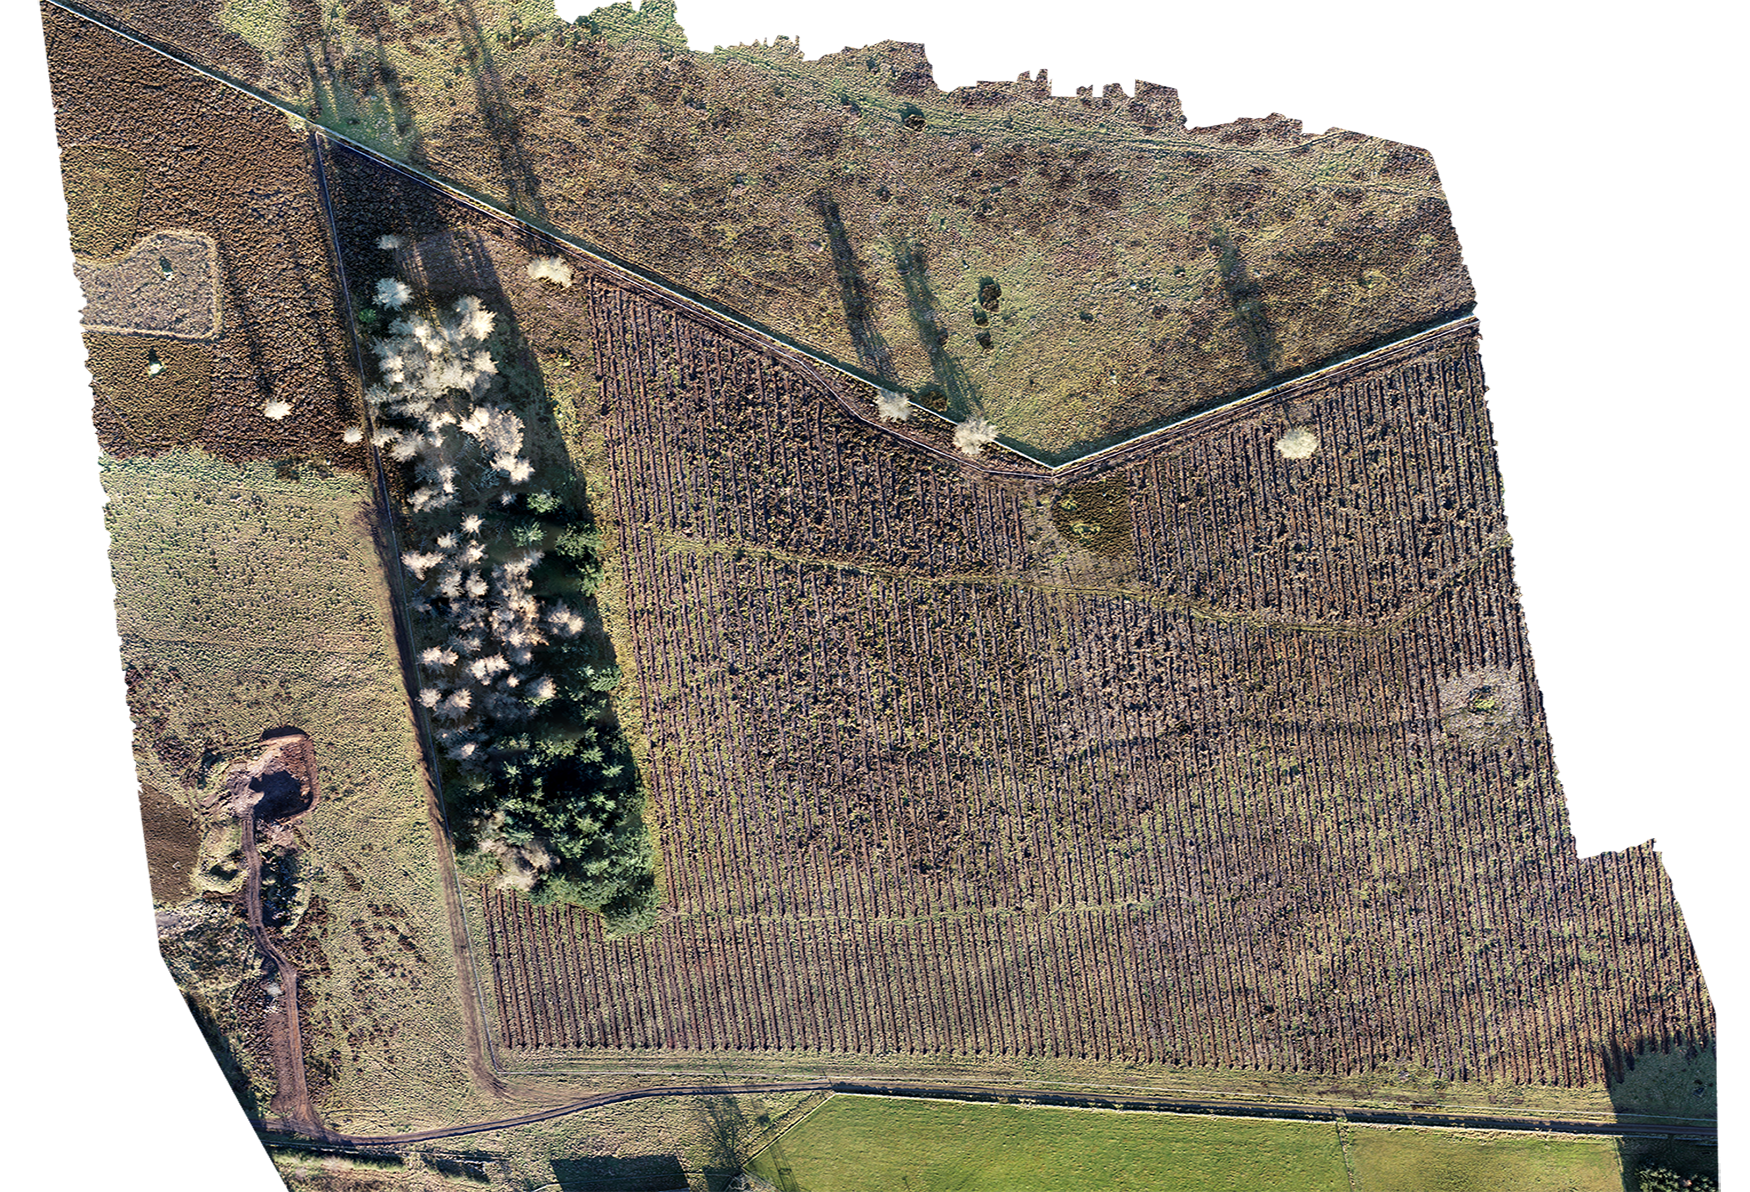 Completed orthorectified aerial photography